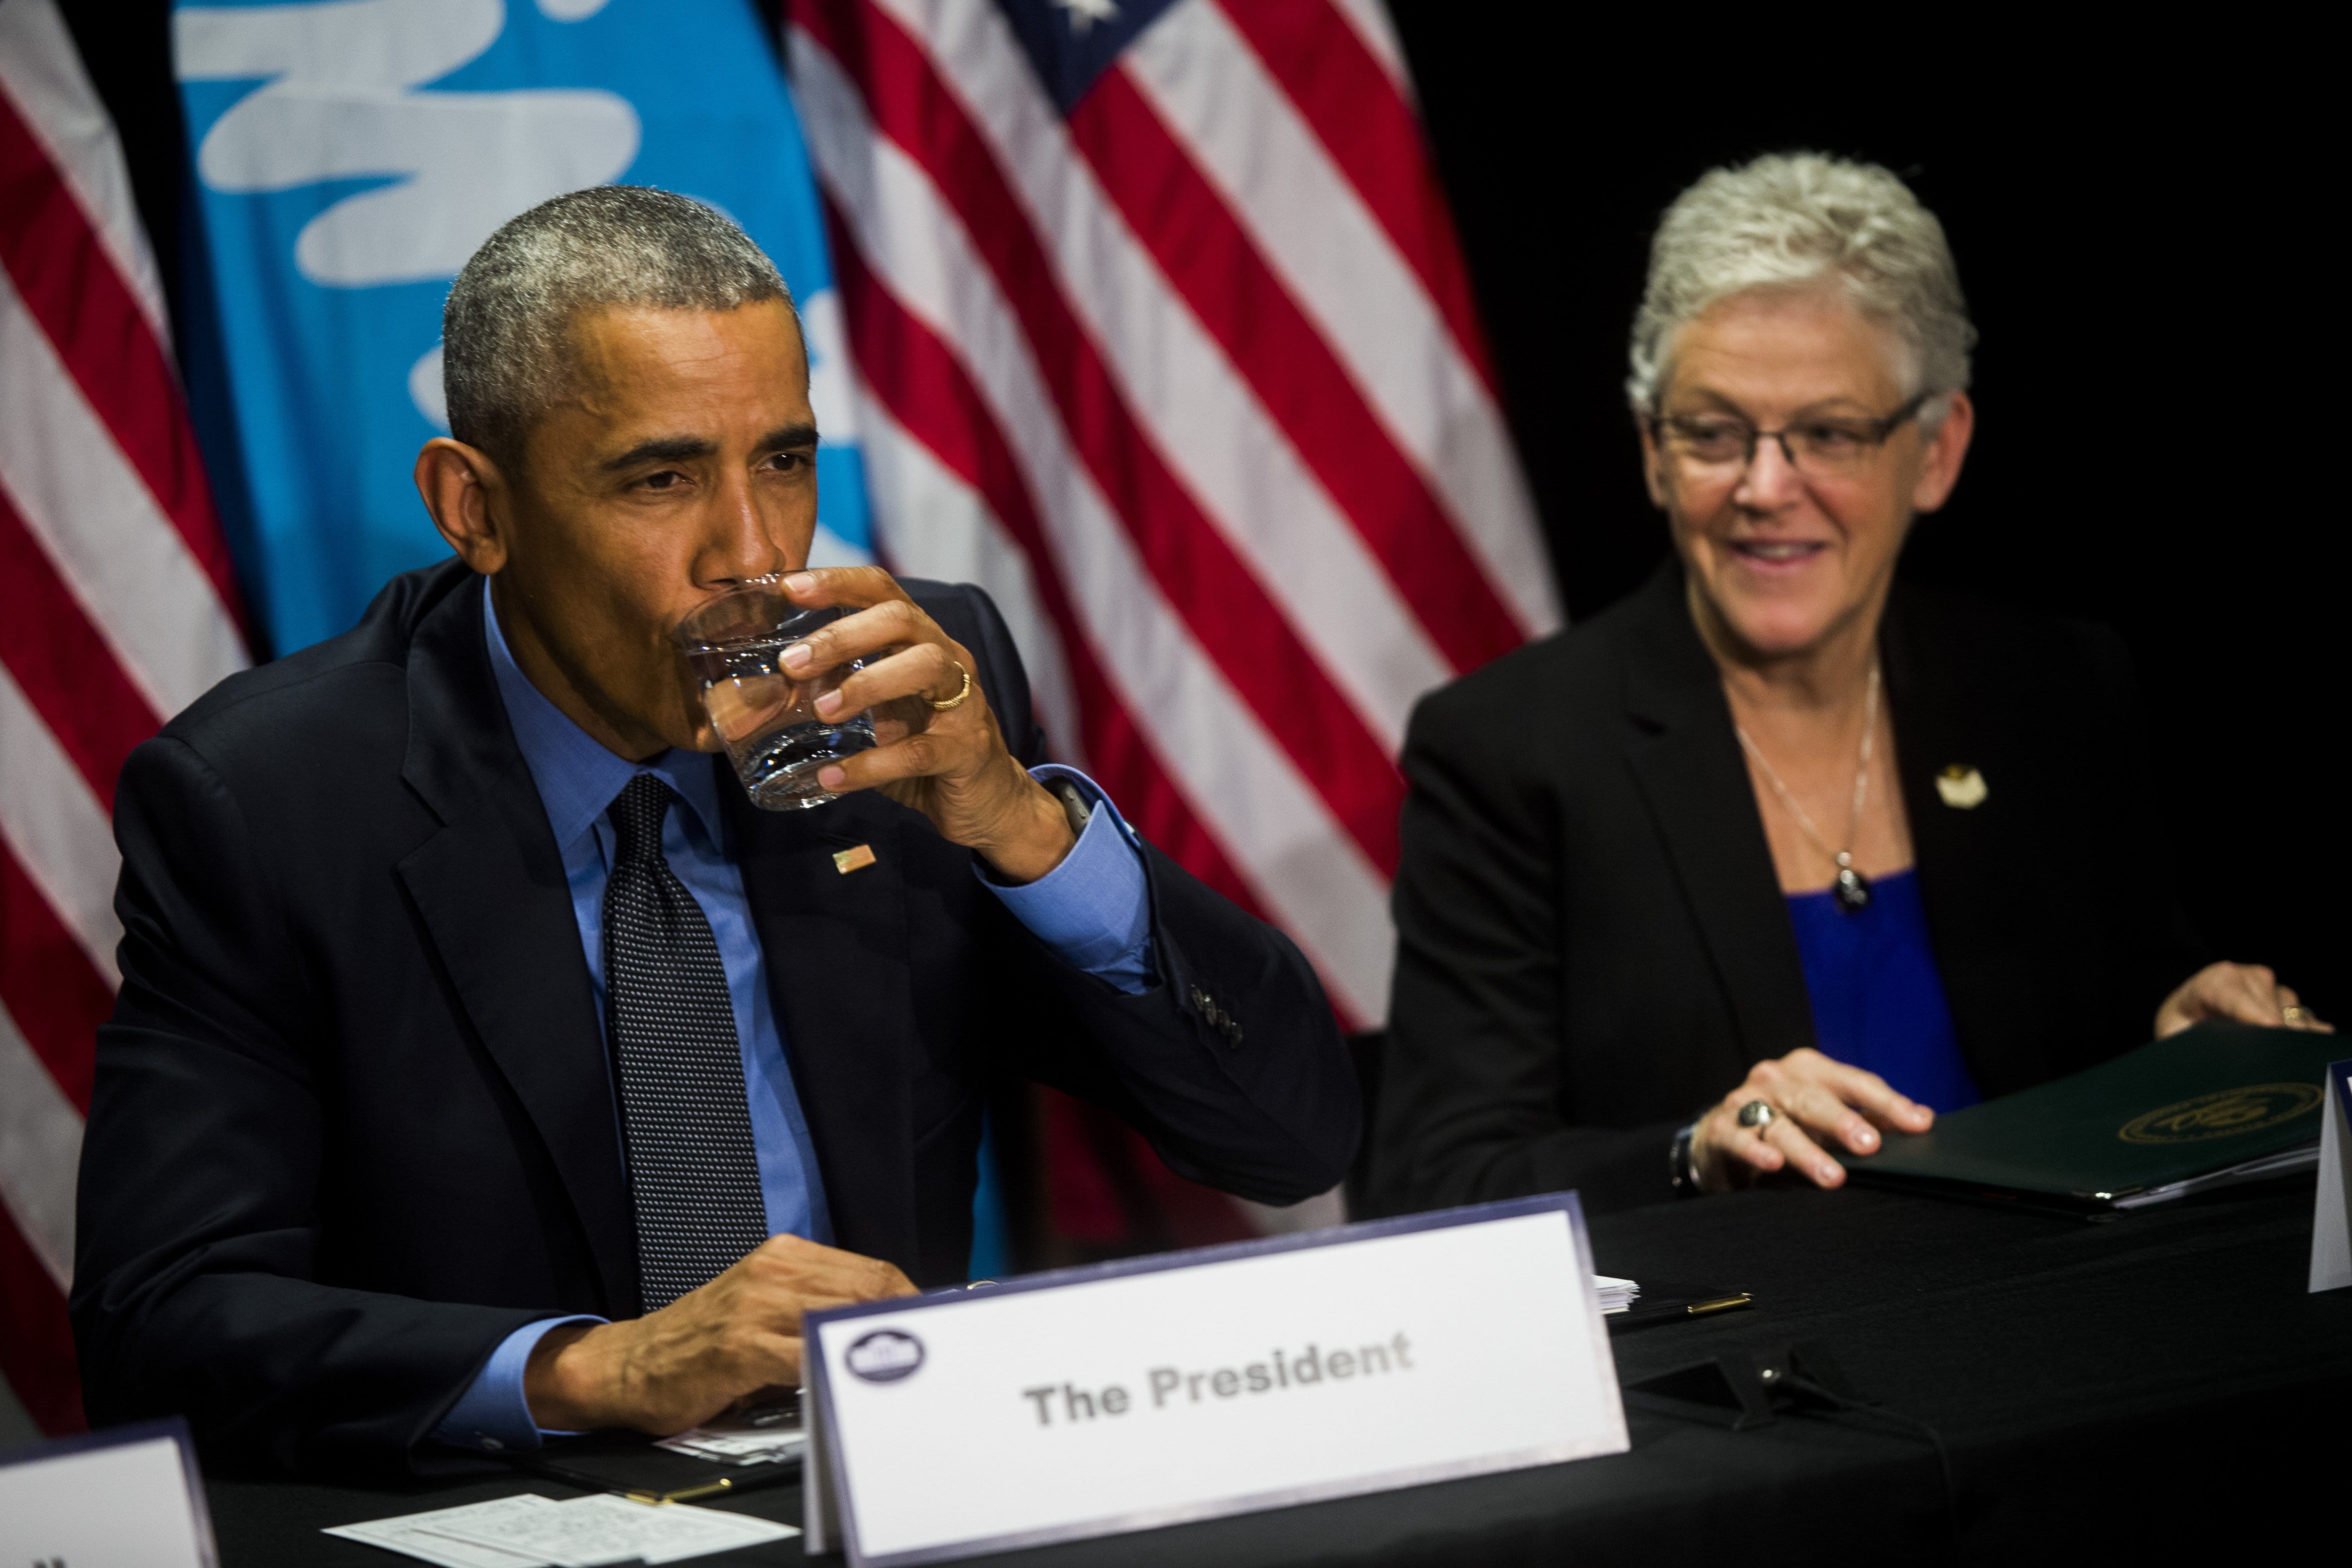 President Barack Obama drinks filtered Flint tap water at a roundtable discussion with city, state and national officials on Wednesday, May 4, 2016 at the Food Bank of Eastern Michigan in Flint. President Obama drank filtered city water to show that it is again safe to drink following a lead-contamination crisis.